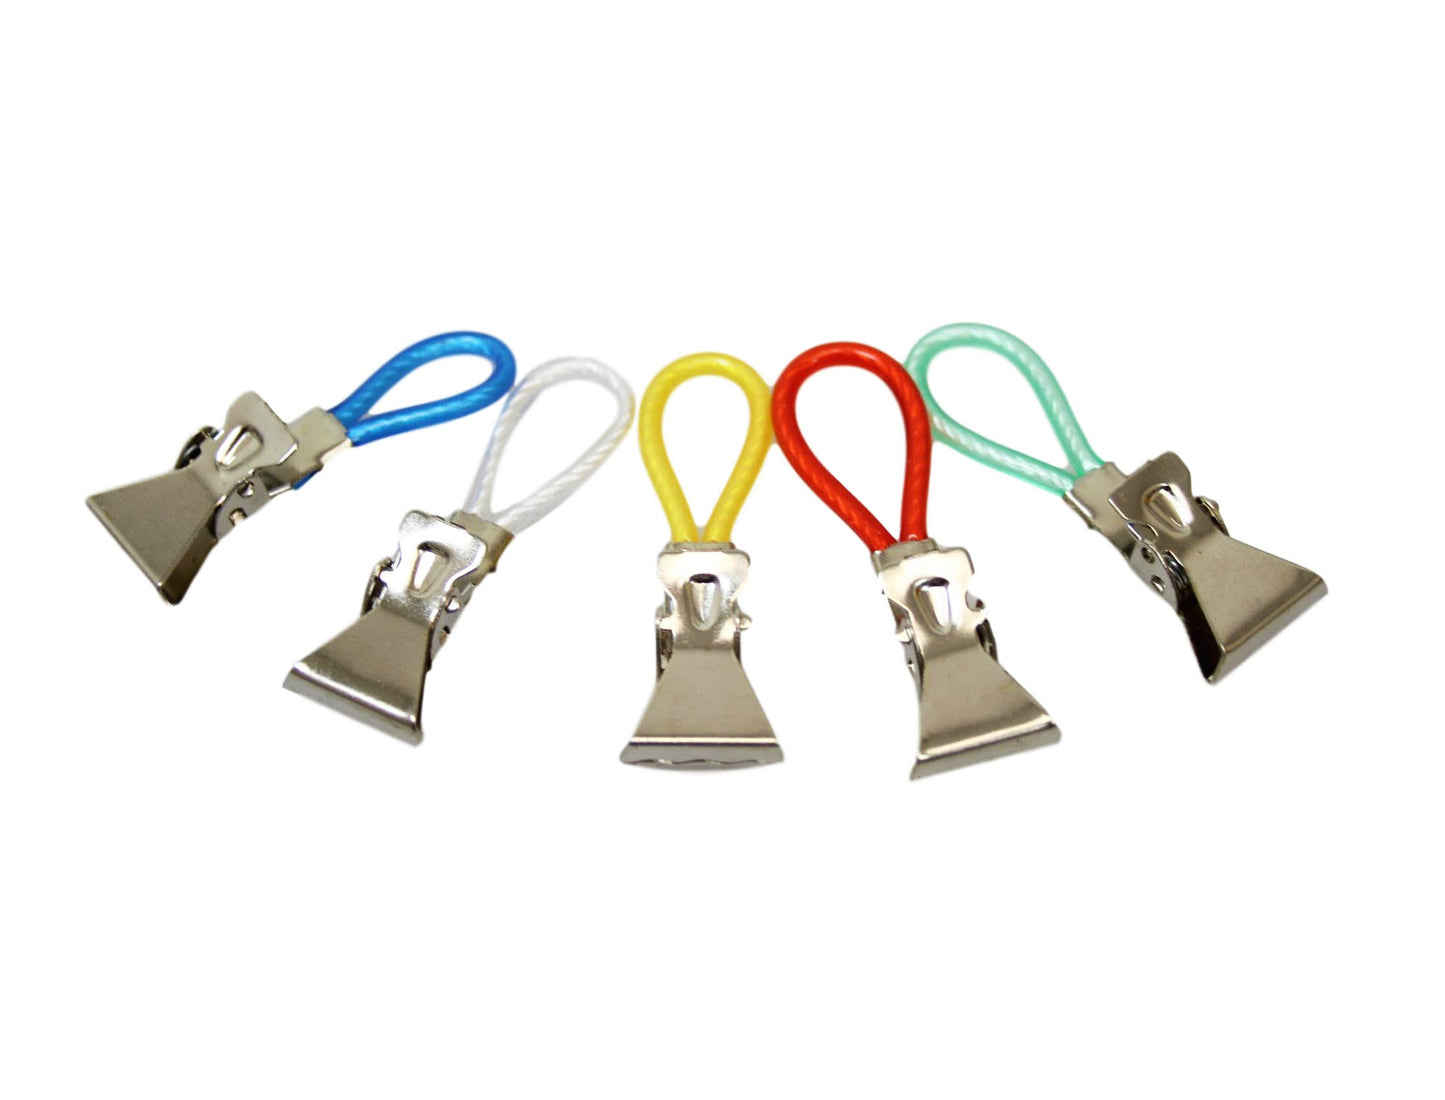 5 Piece Clips Towel Cloth Hanging Clips Metal Assorted Colour 2cm Clip 2821 (Large Letter Rate)